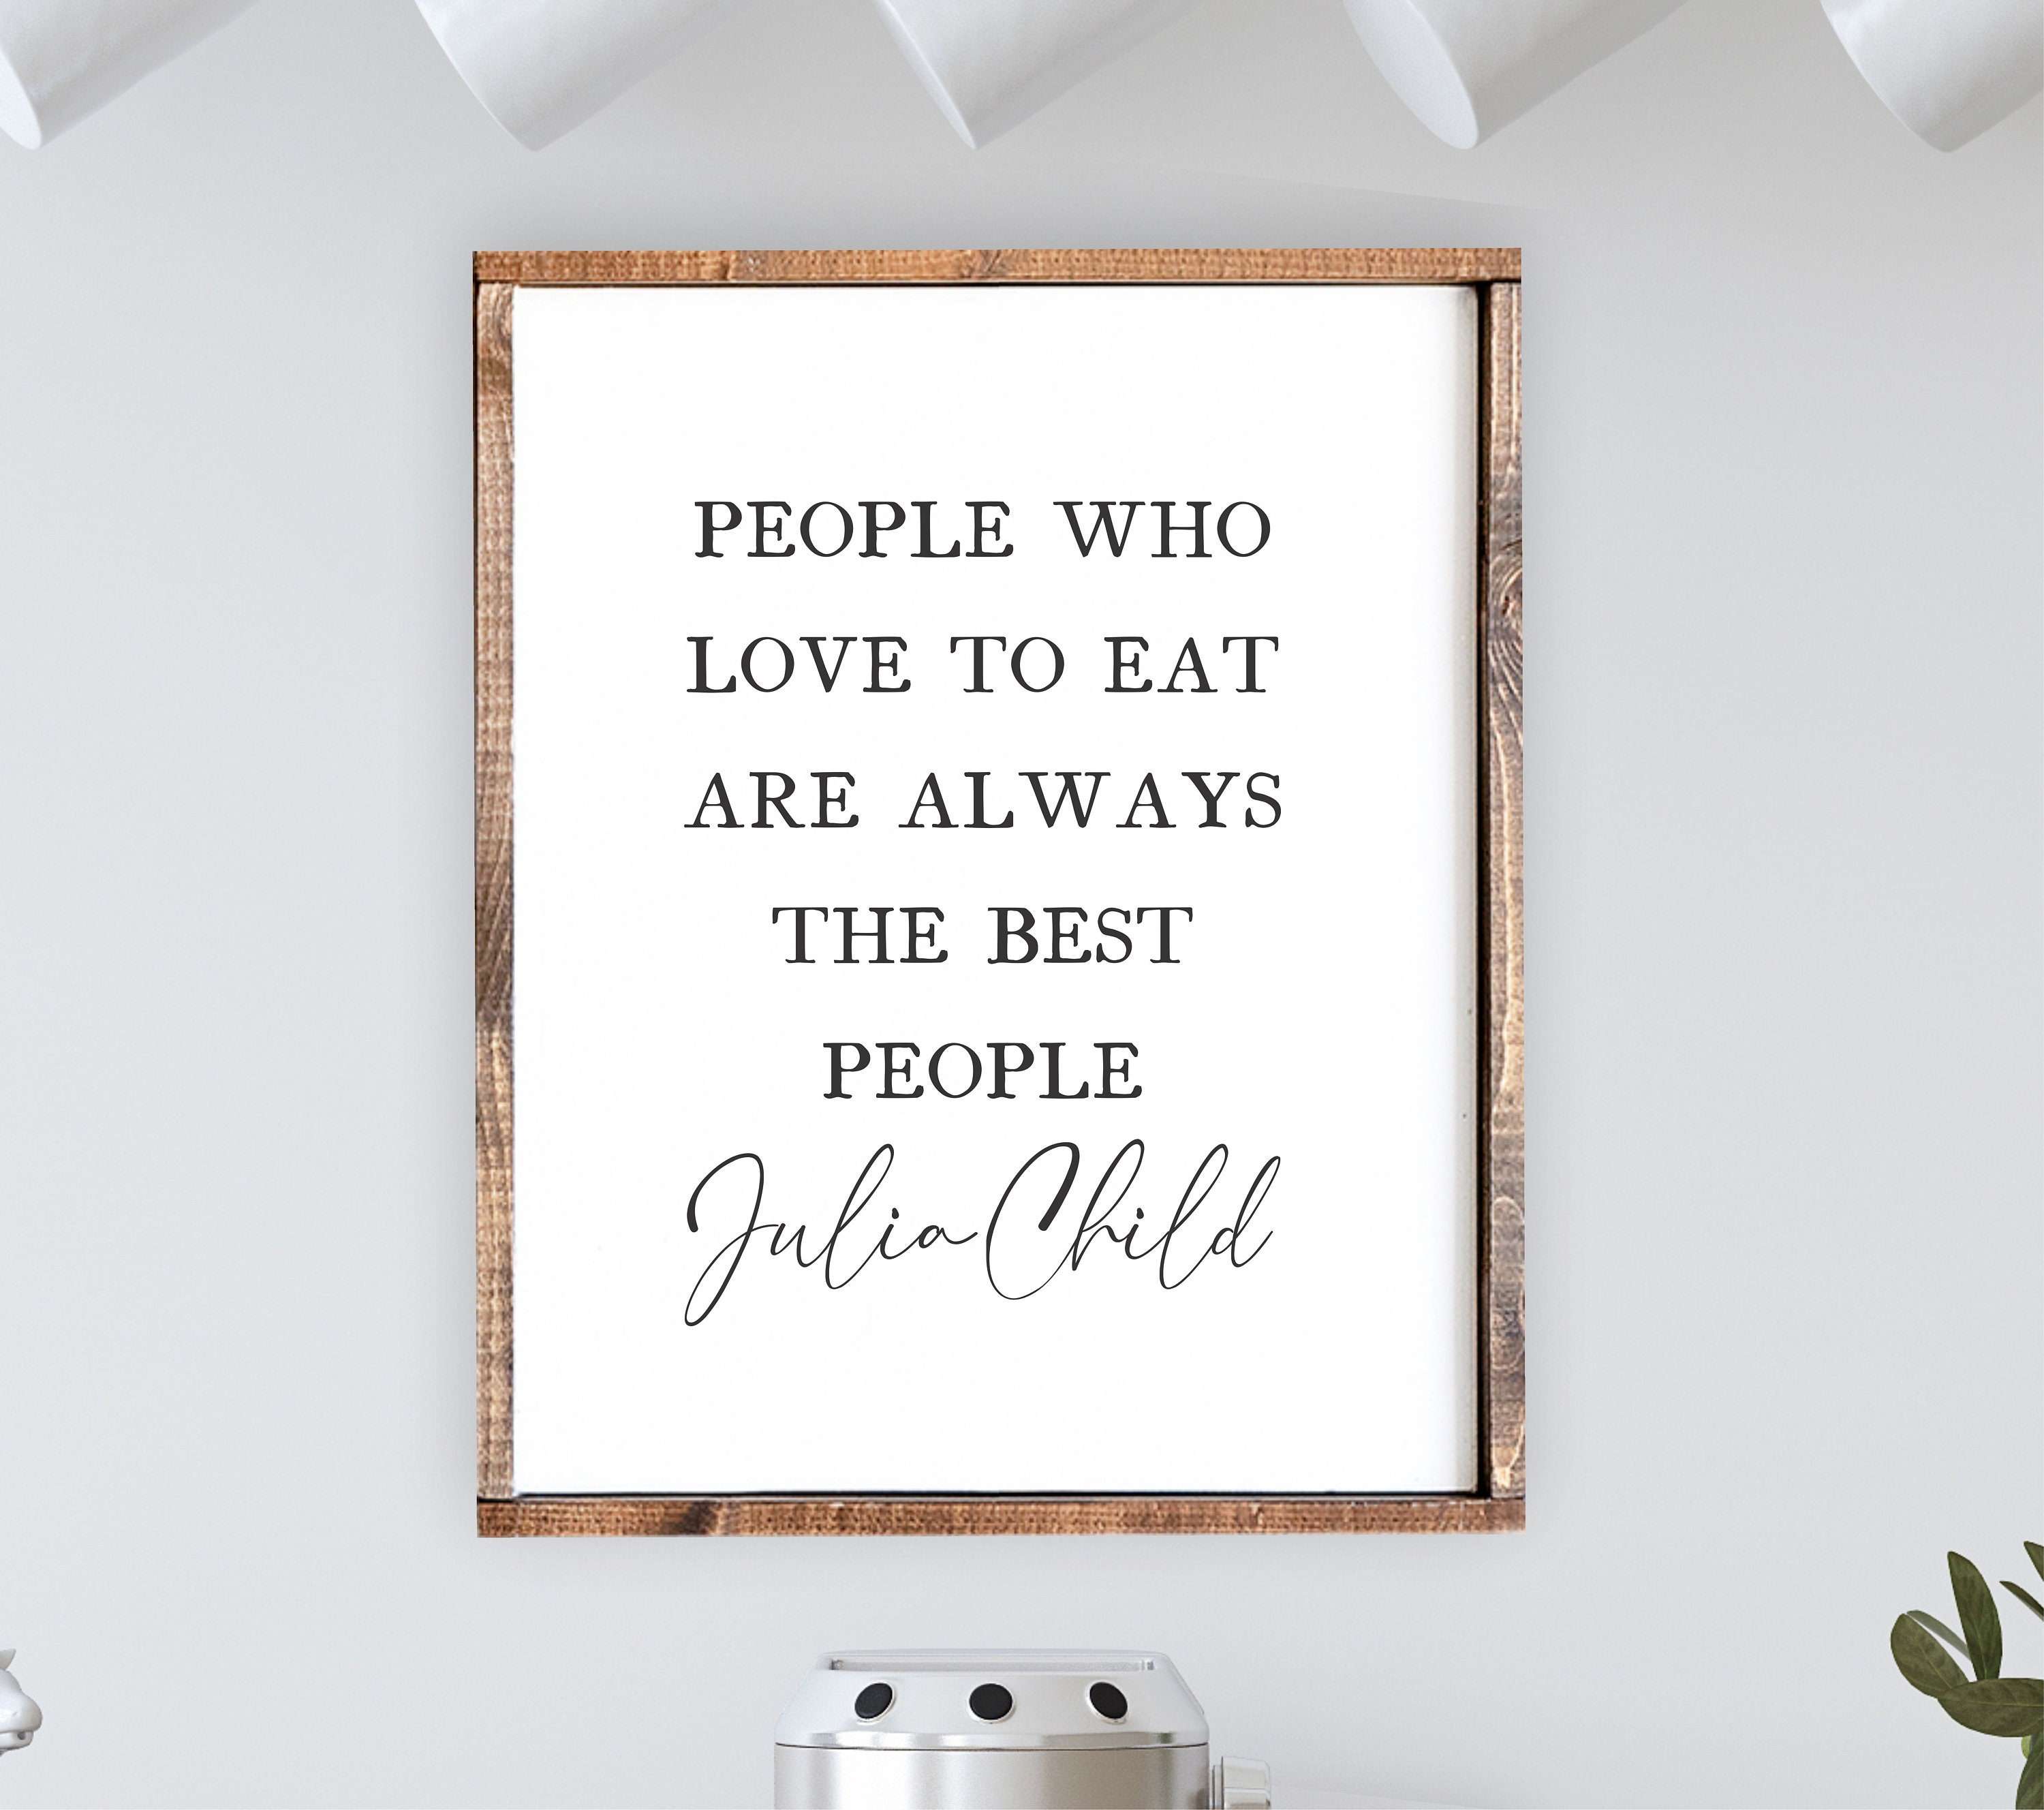 People Who Love People Best Always Julia Are Etsy the to - Eat Child